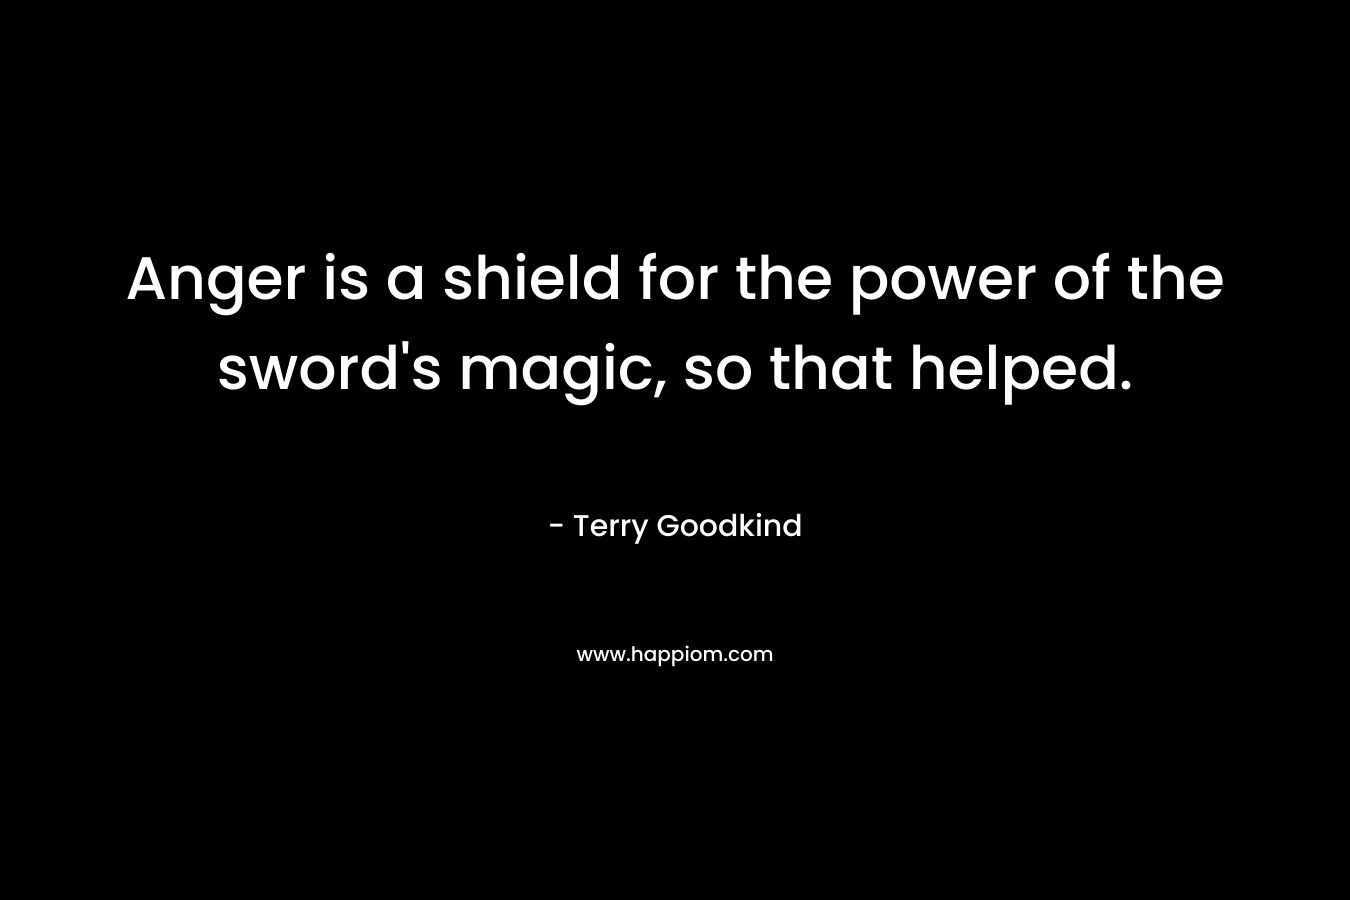 Anger is a shield for the power of the sword’s magic, so that helped. – Terry Goodkind